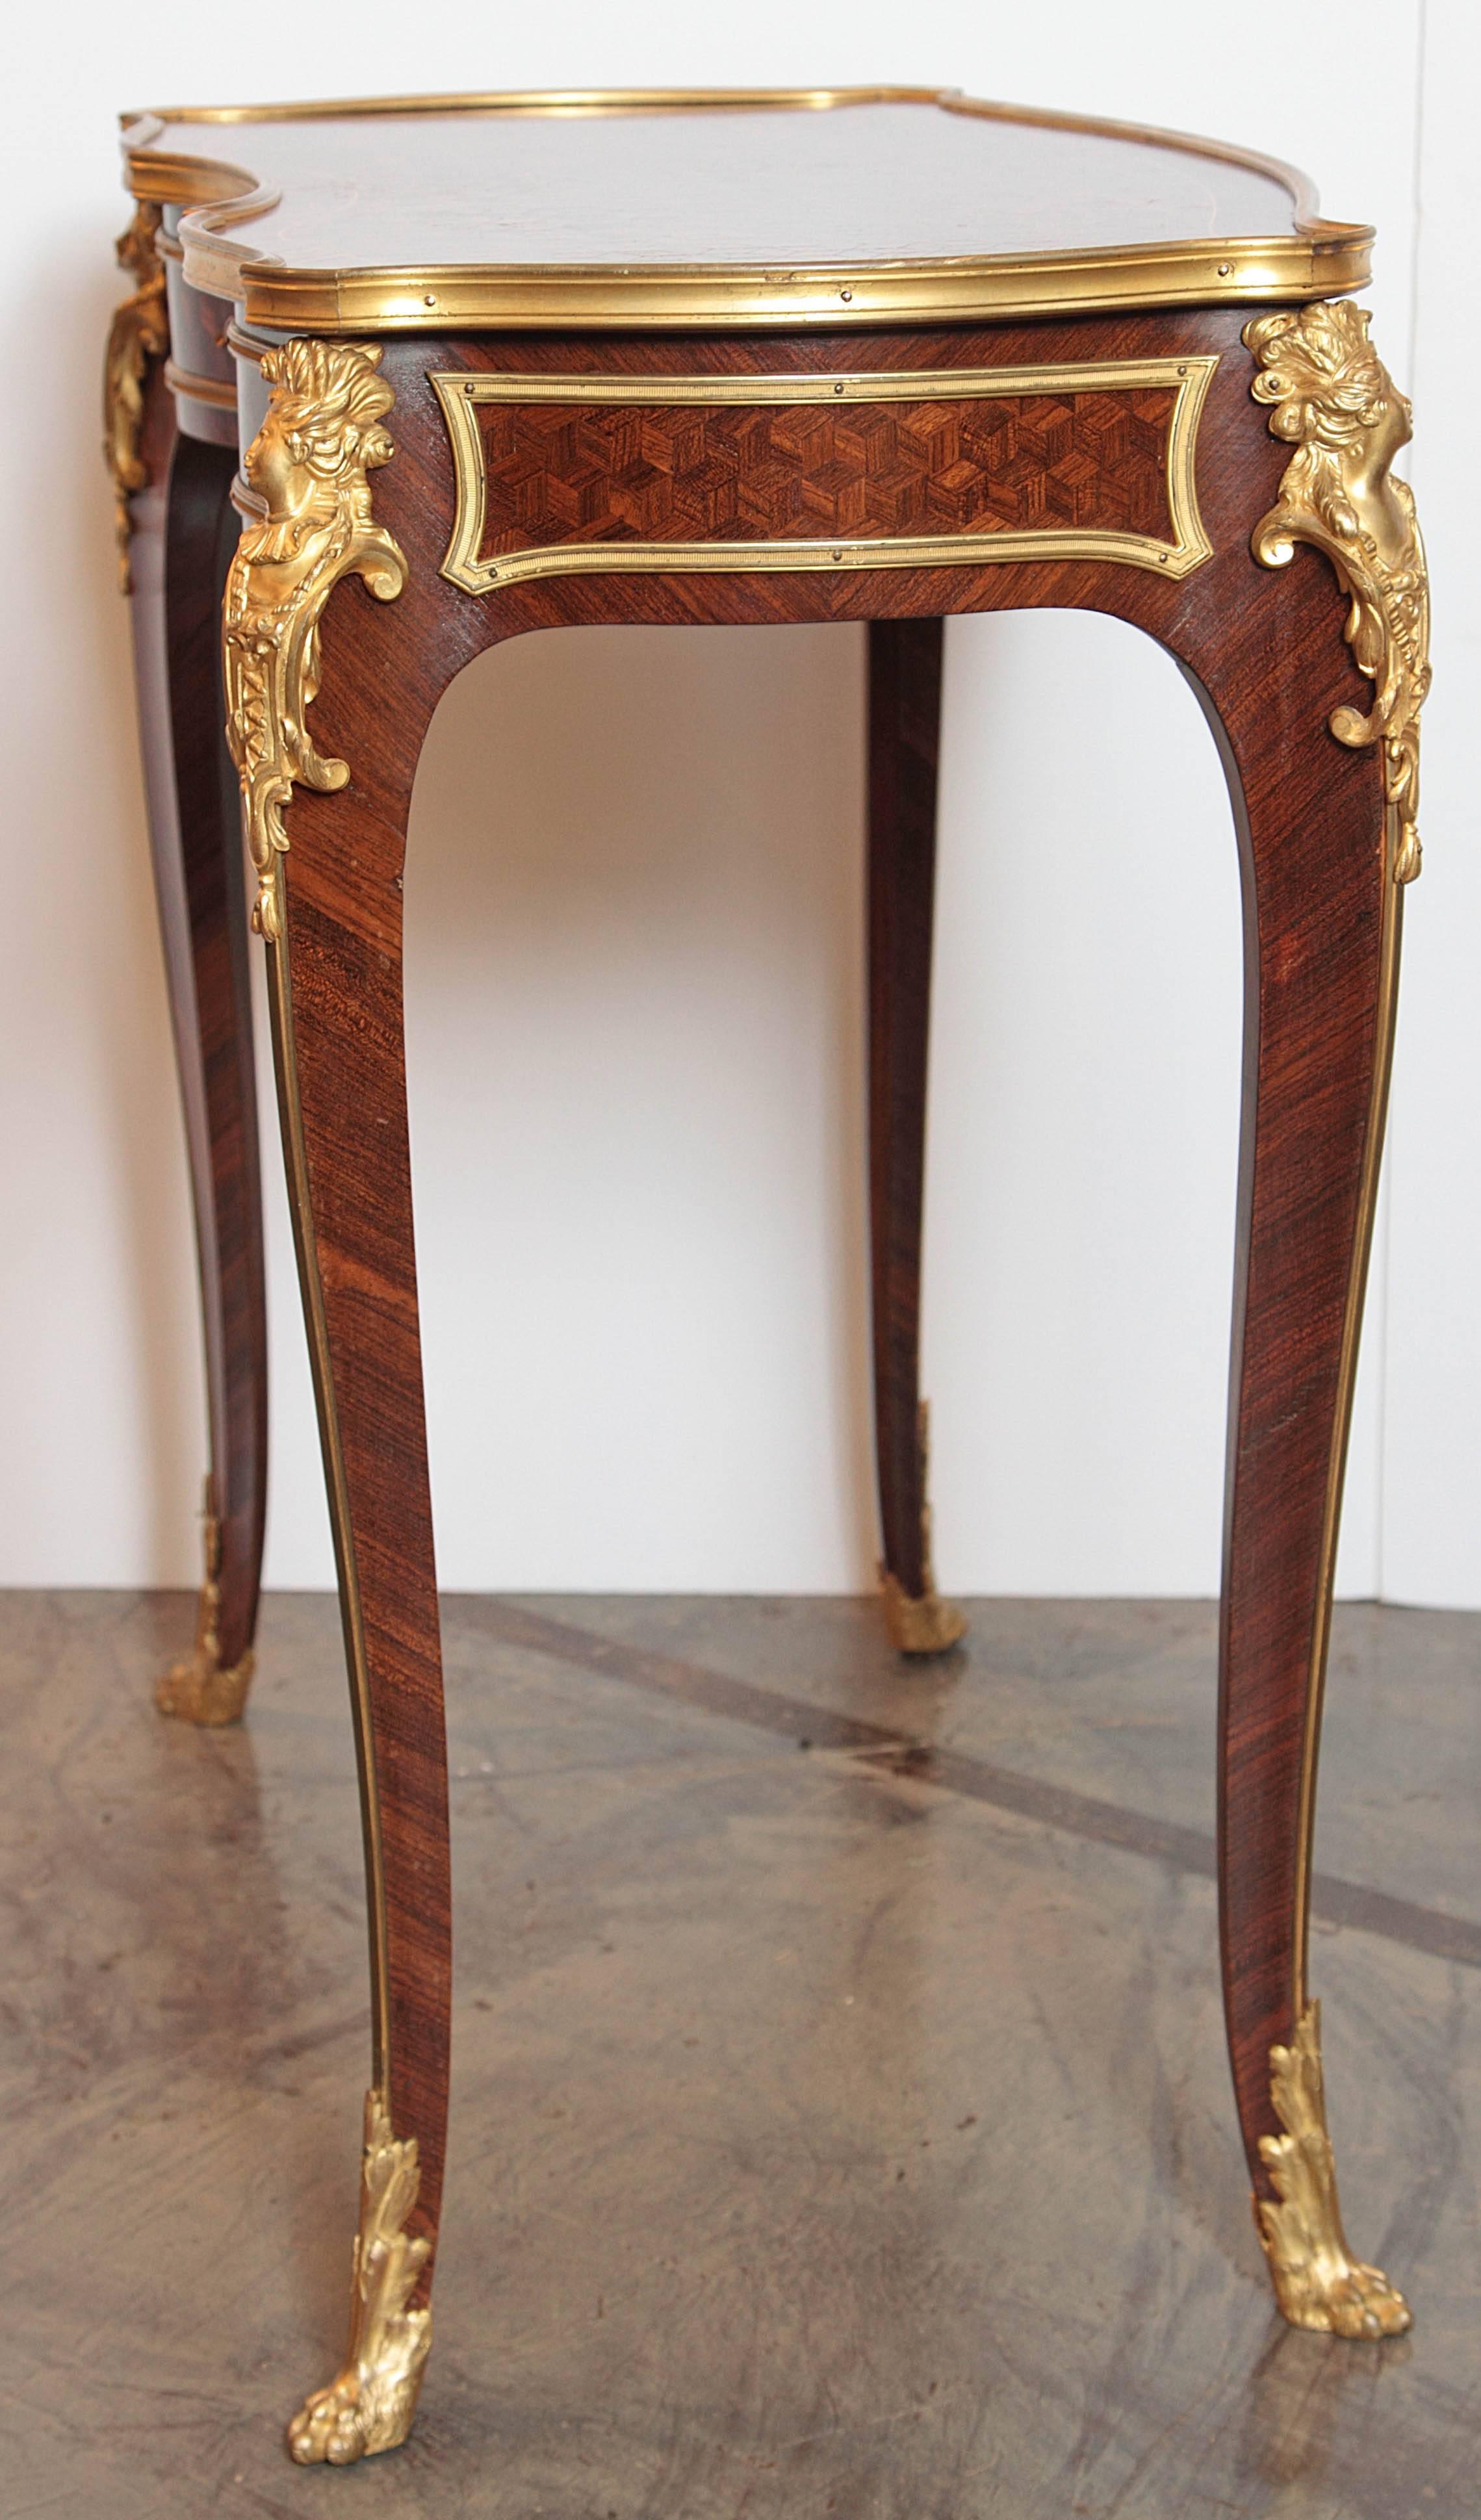 European 19th Century Parquetry Kingwood and Gilt Bronze Table by P Sormani For Sale